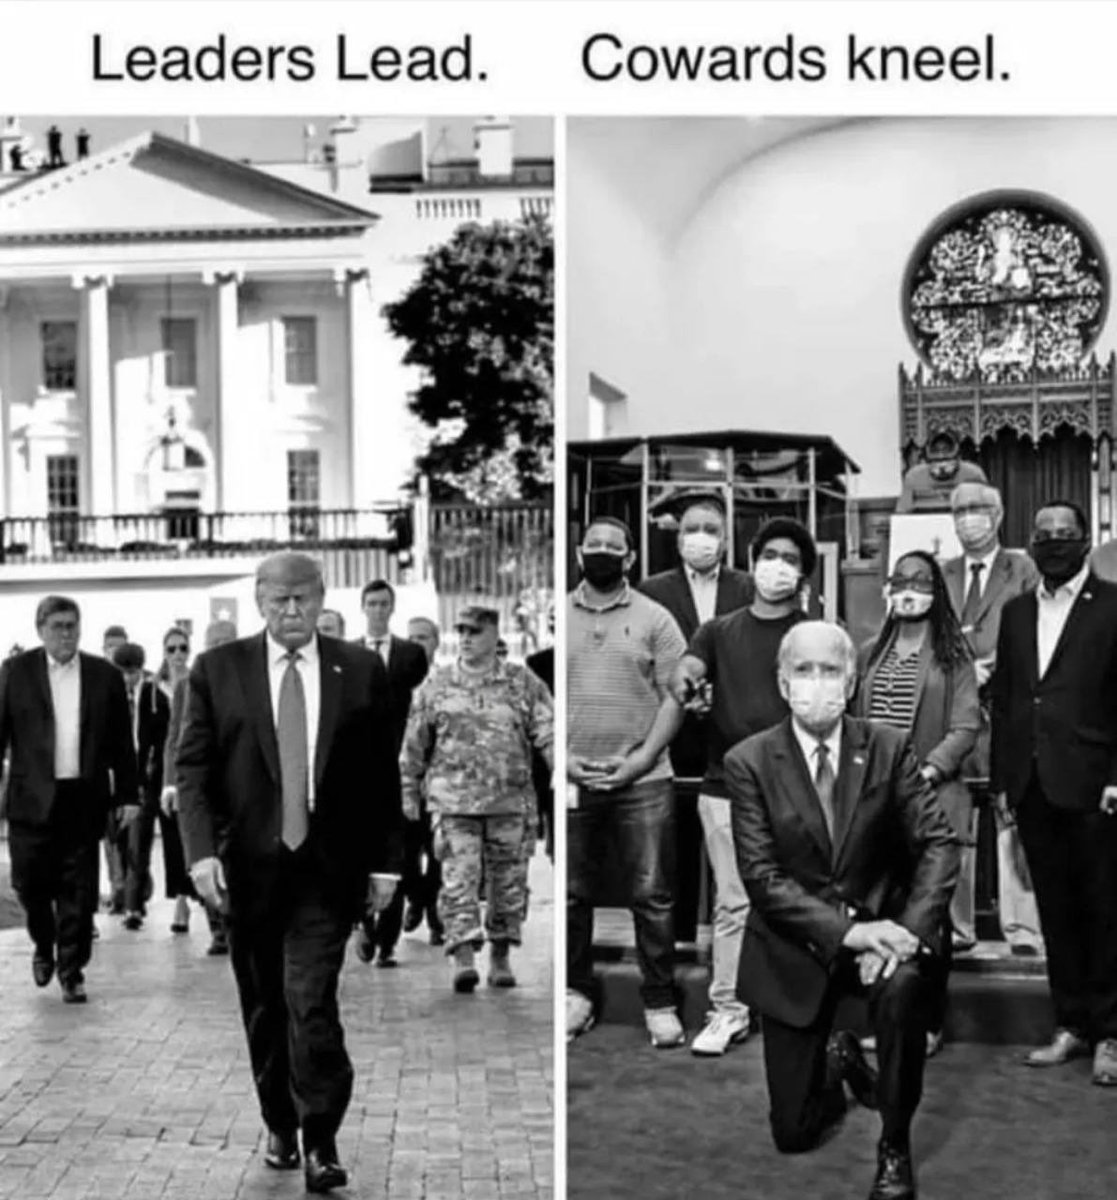 We are NOT and we will never be a 'kneeler' nation. Our founding fathers and their legacy is still alive. A legacy of great respect, morale, strong dedication and pride in their honor. That's why some of us are LEADERS and others can bow down to hypocrisy! 🇺🇸